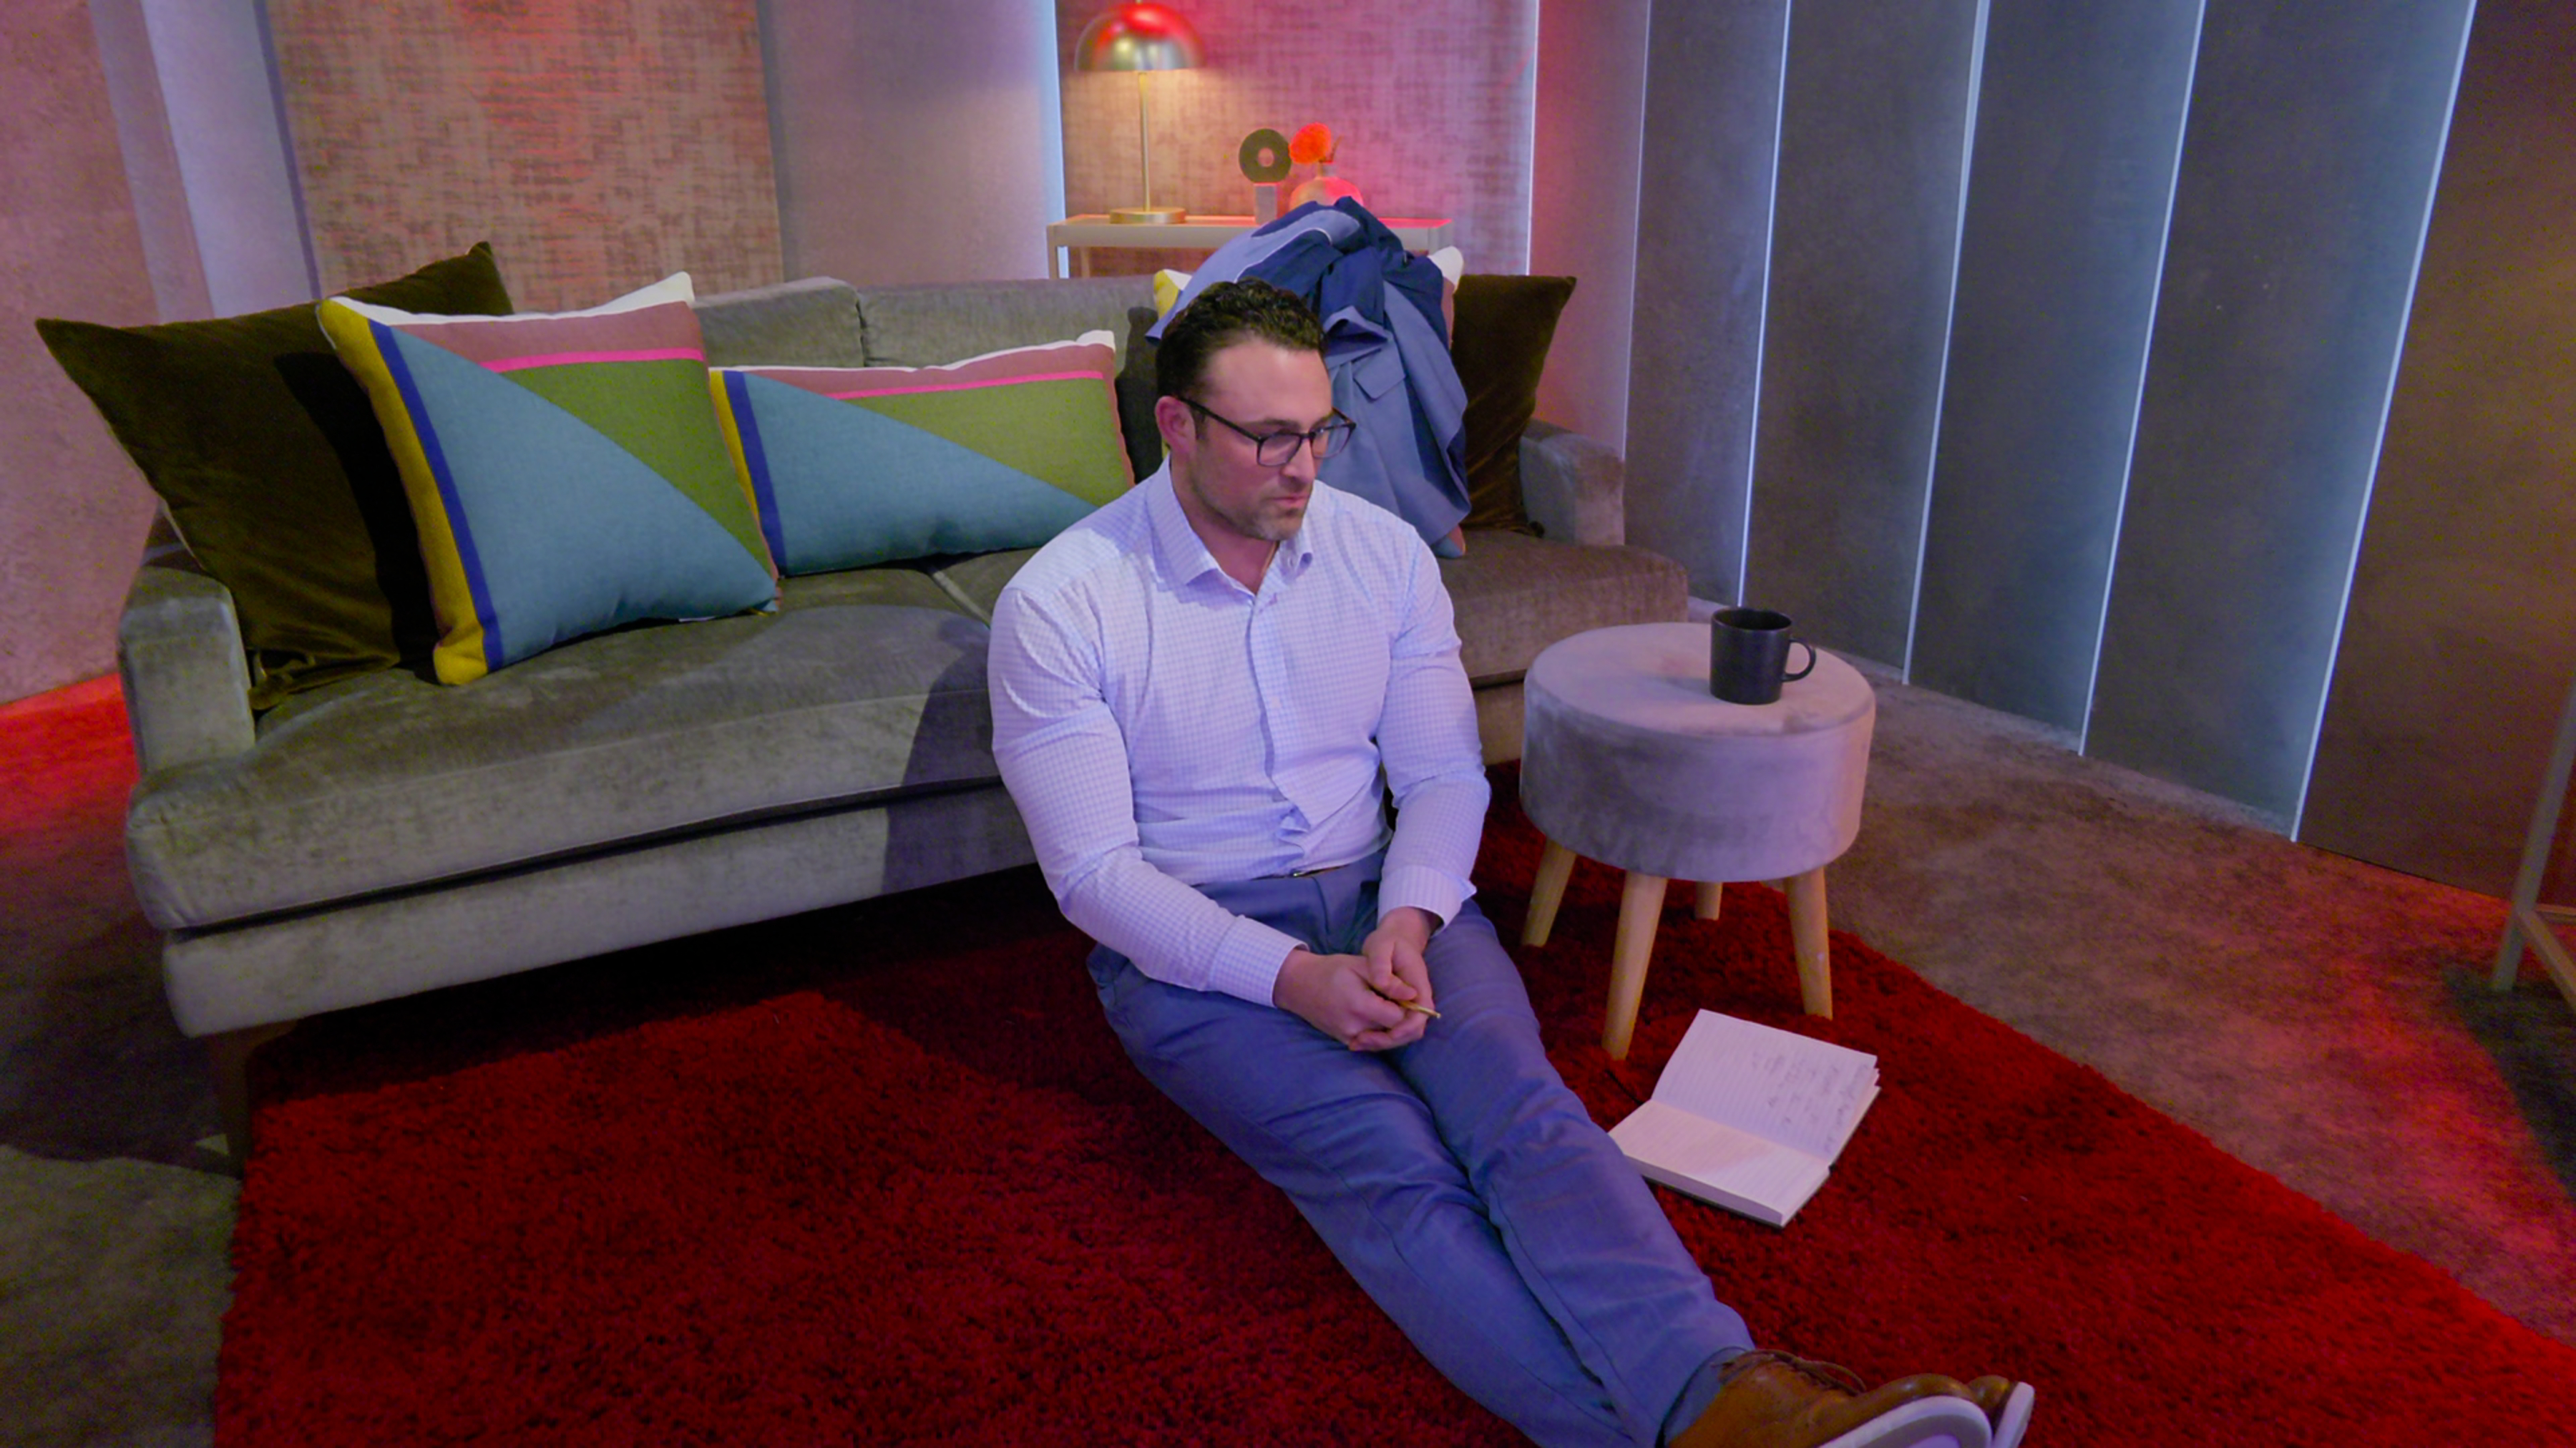 Matthew in glasses and casual attire sitting on floor in the pods